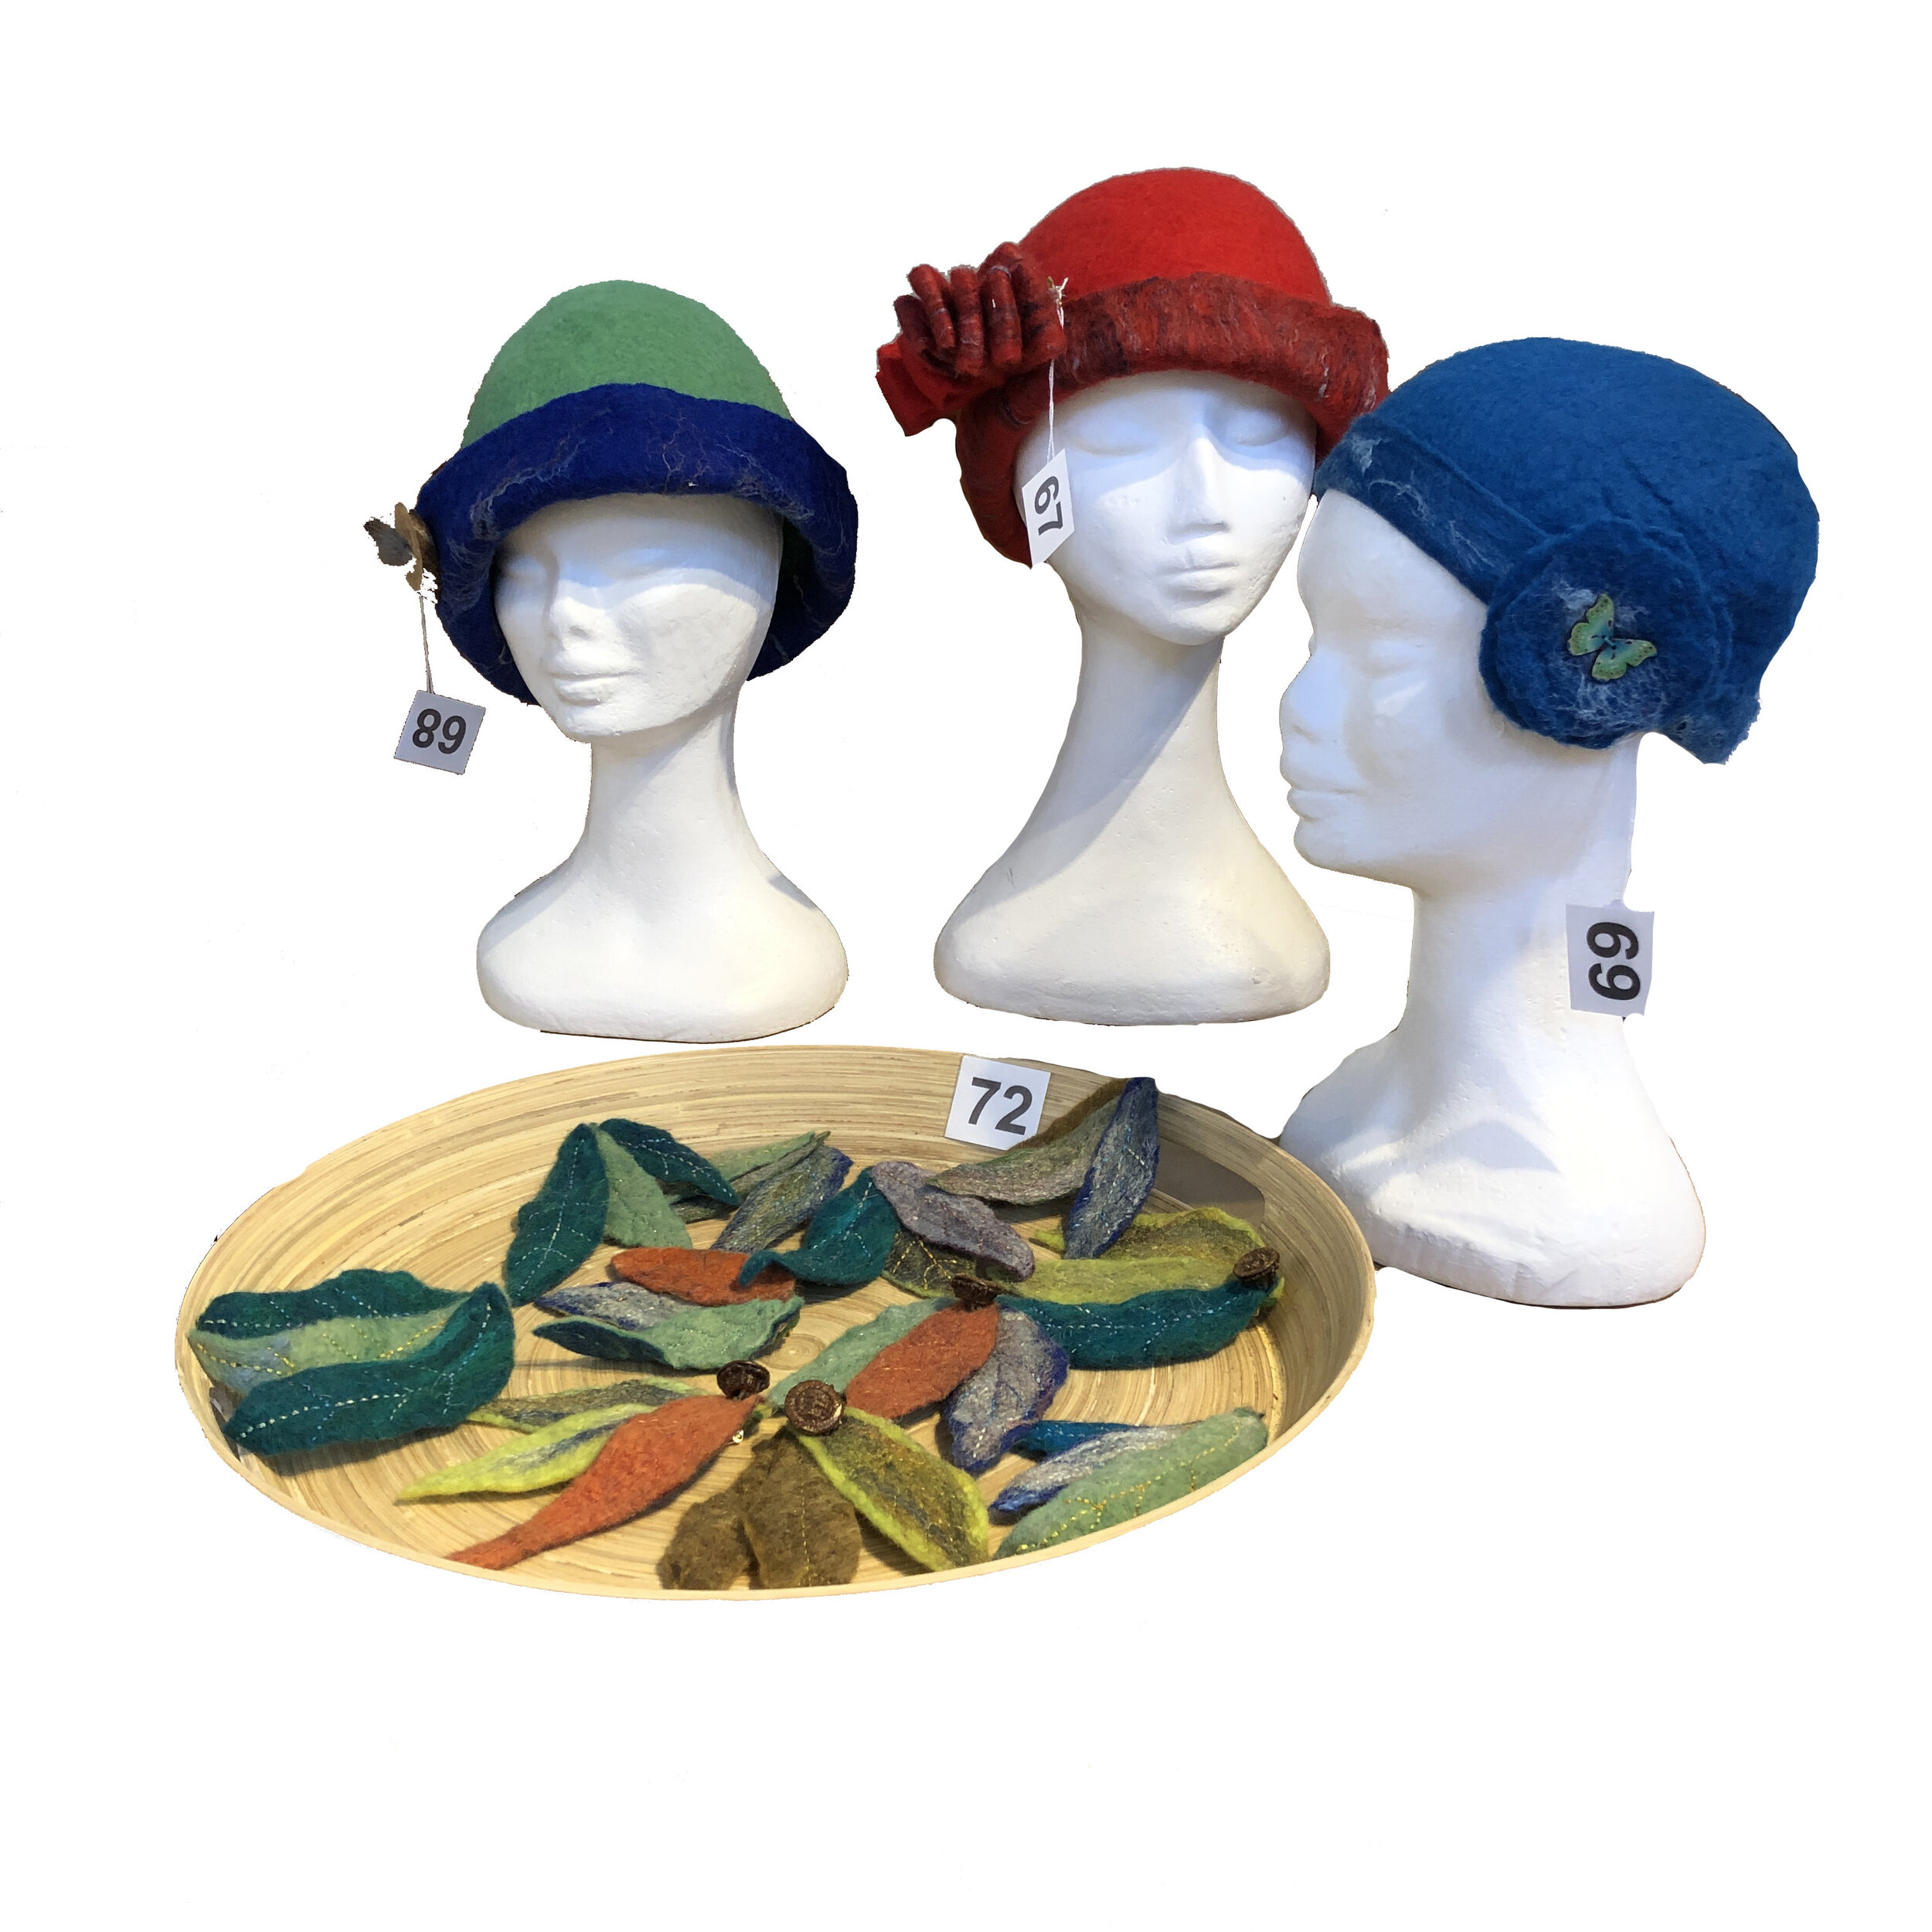  “Felted Hat - Red”, “Felted Hat - Green”, “Childs Felted Hat” and “Gumleaf Brooches”  Ann Smith 